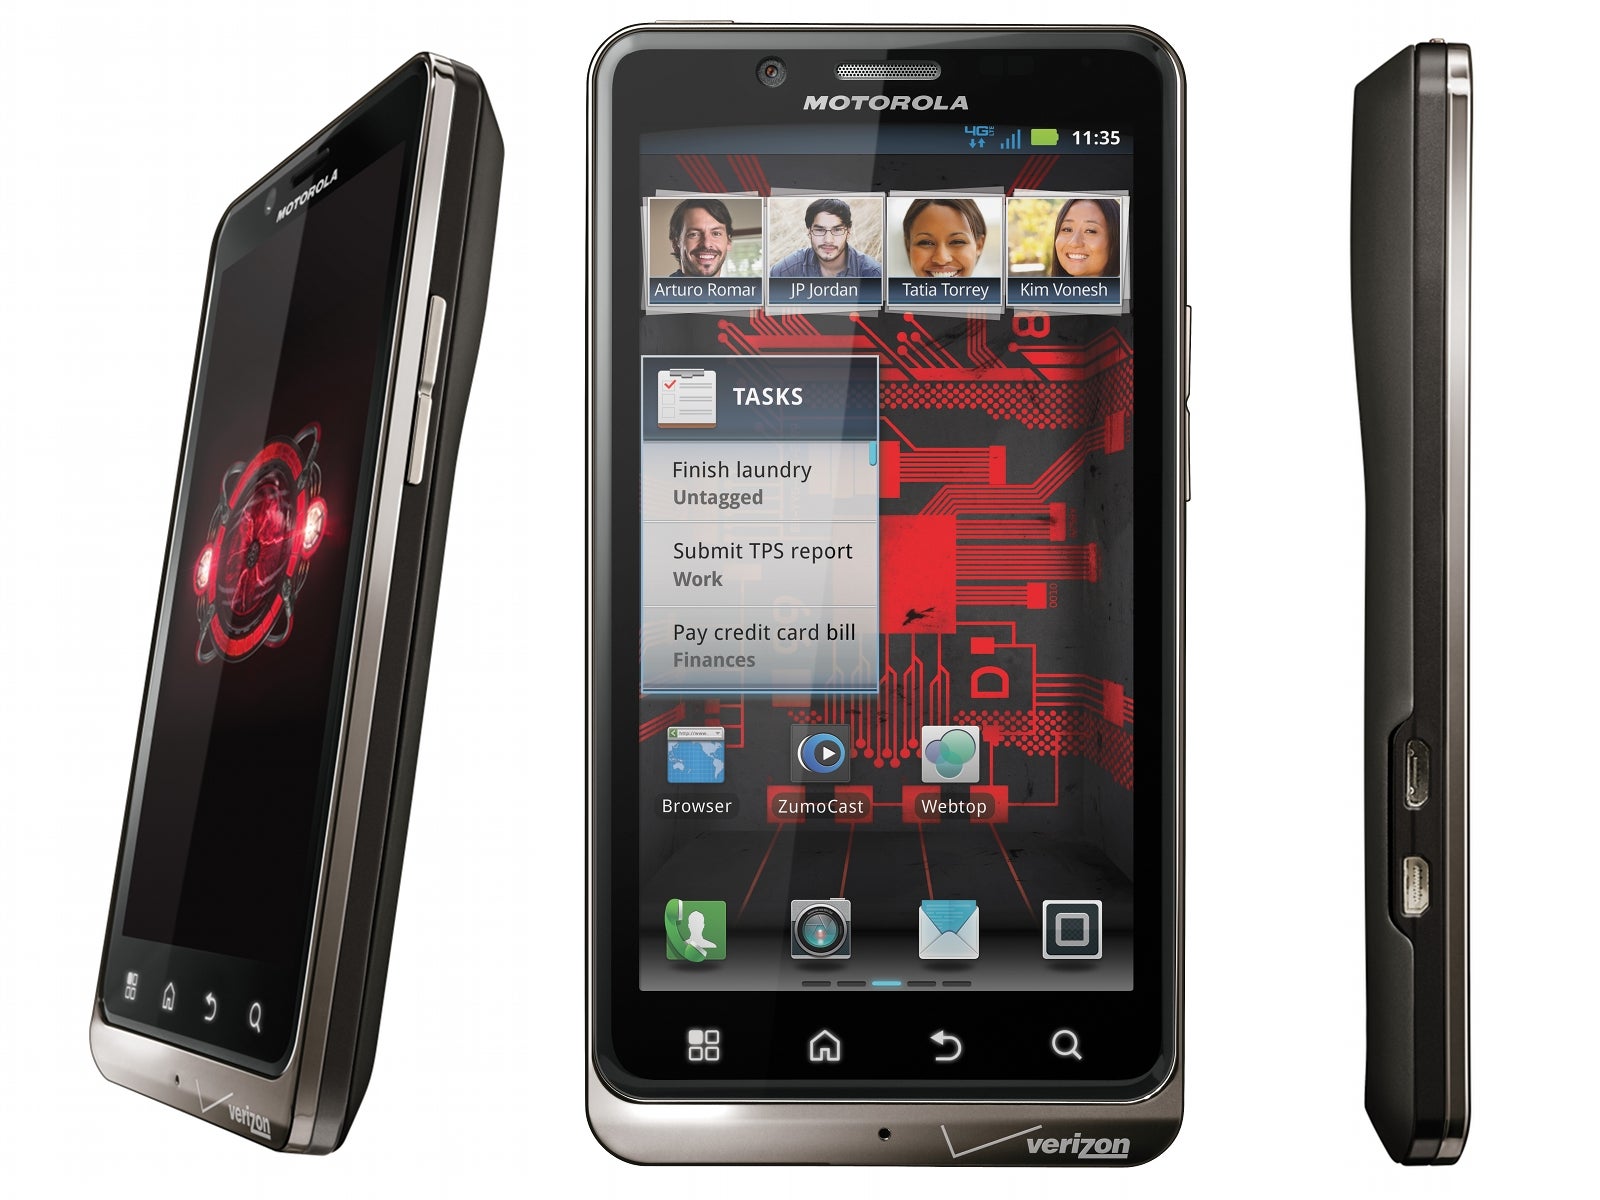 The Motorola DROID BIONIC will receive its Android 4.1 update in Q2 - Motorola DROID BIONIC to get Android 4.1 in Q2